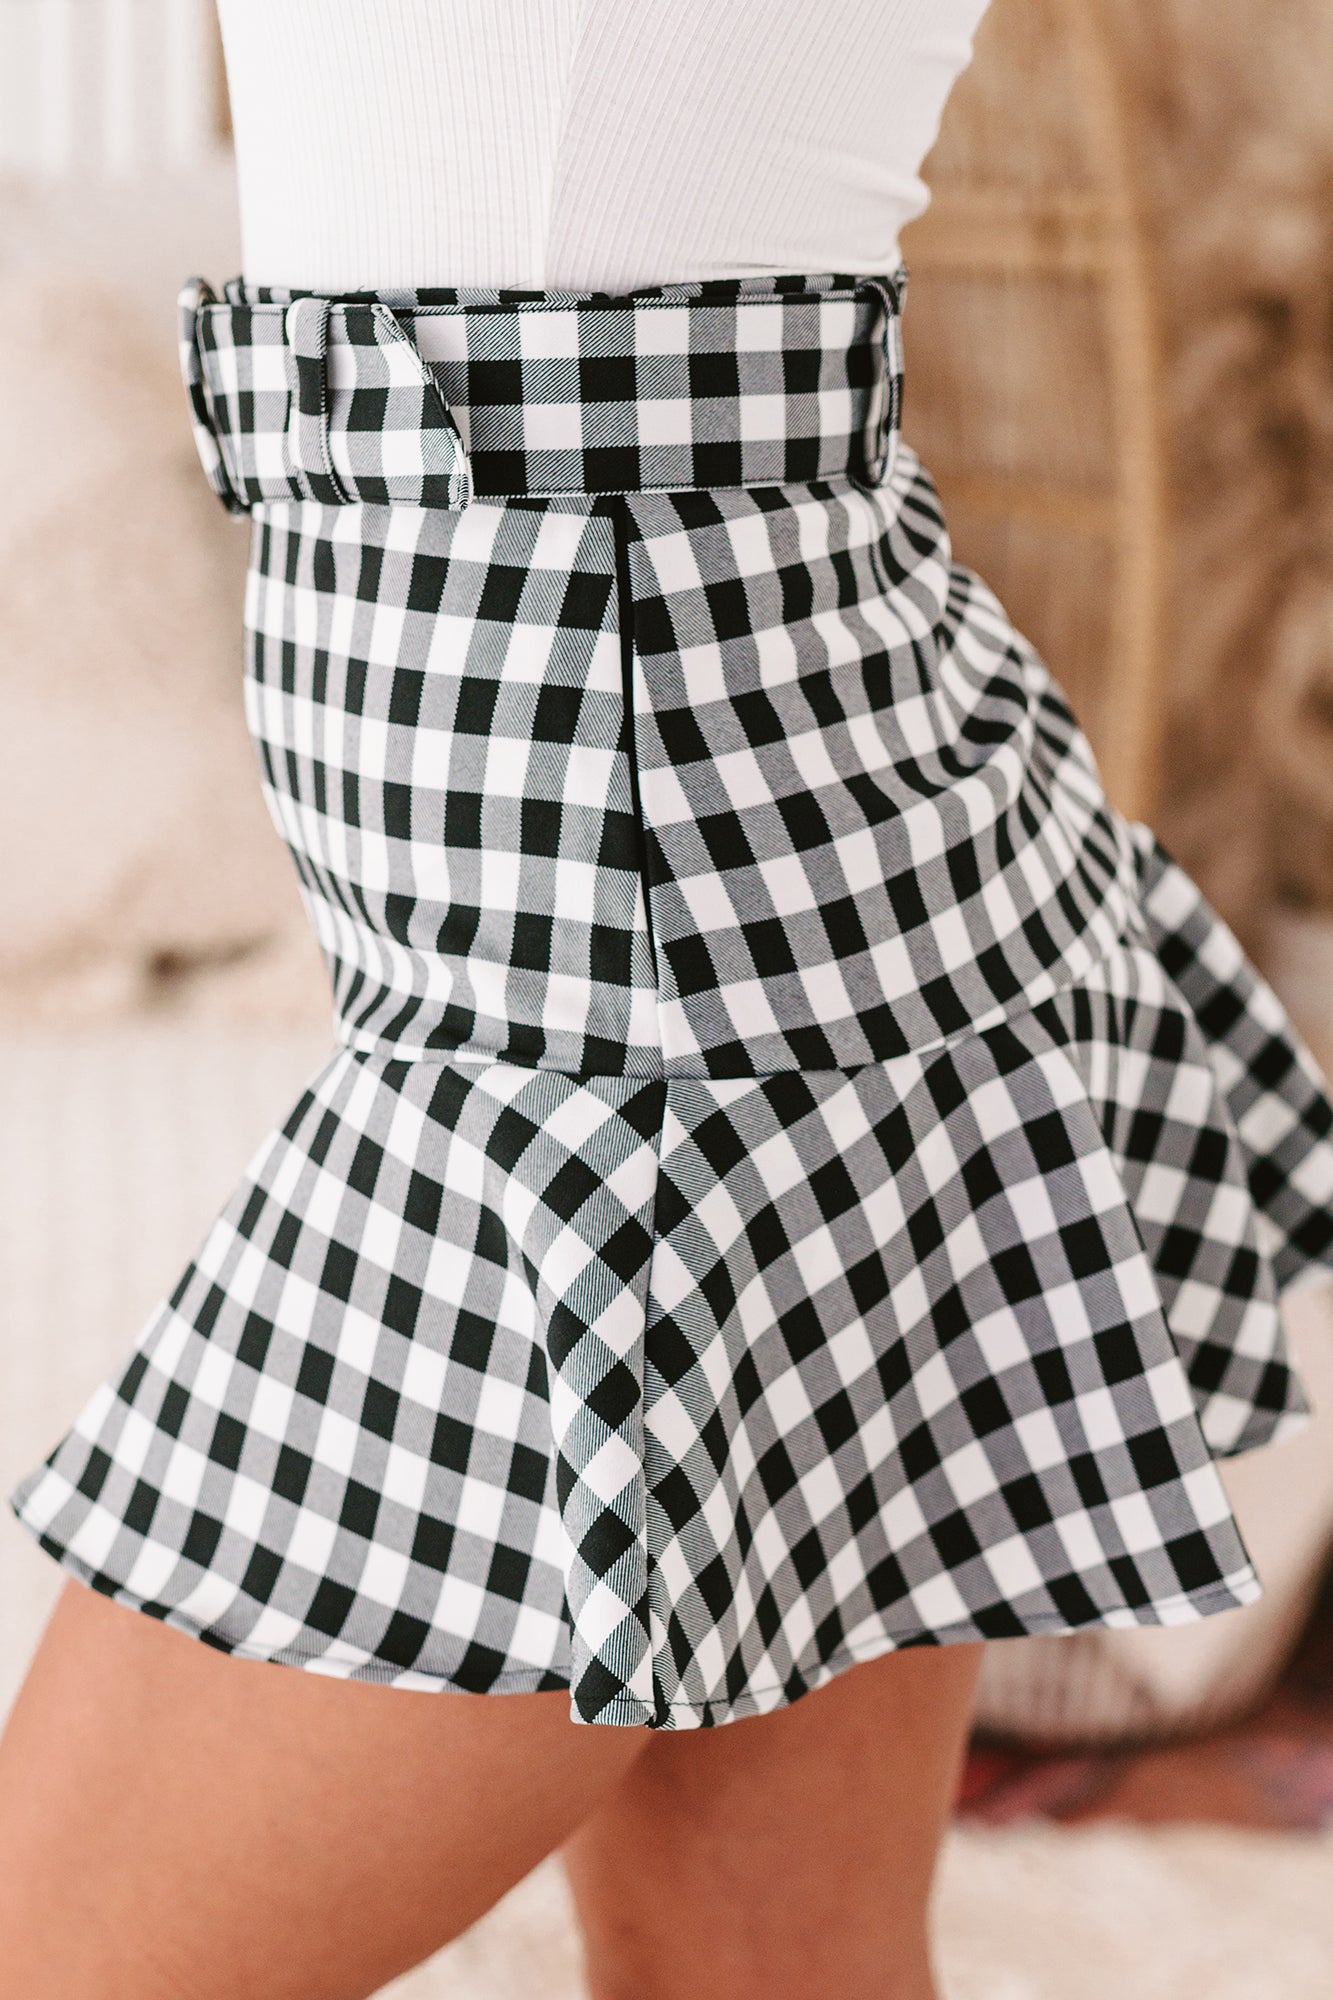 Country Club Connections Belted Gingham Print Skort (Black) - NanaMacs